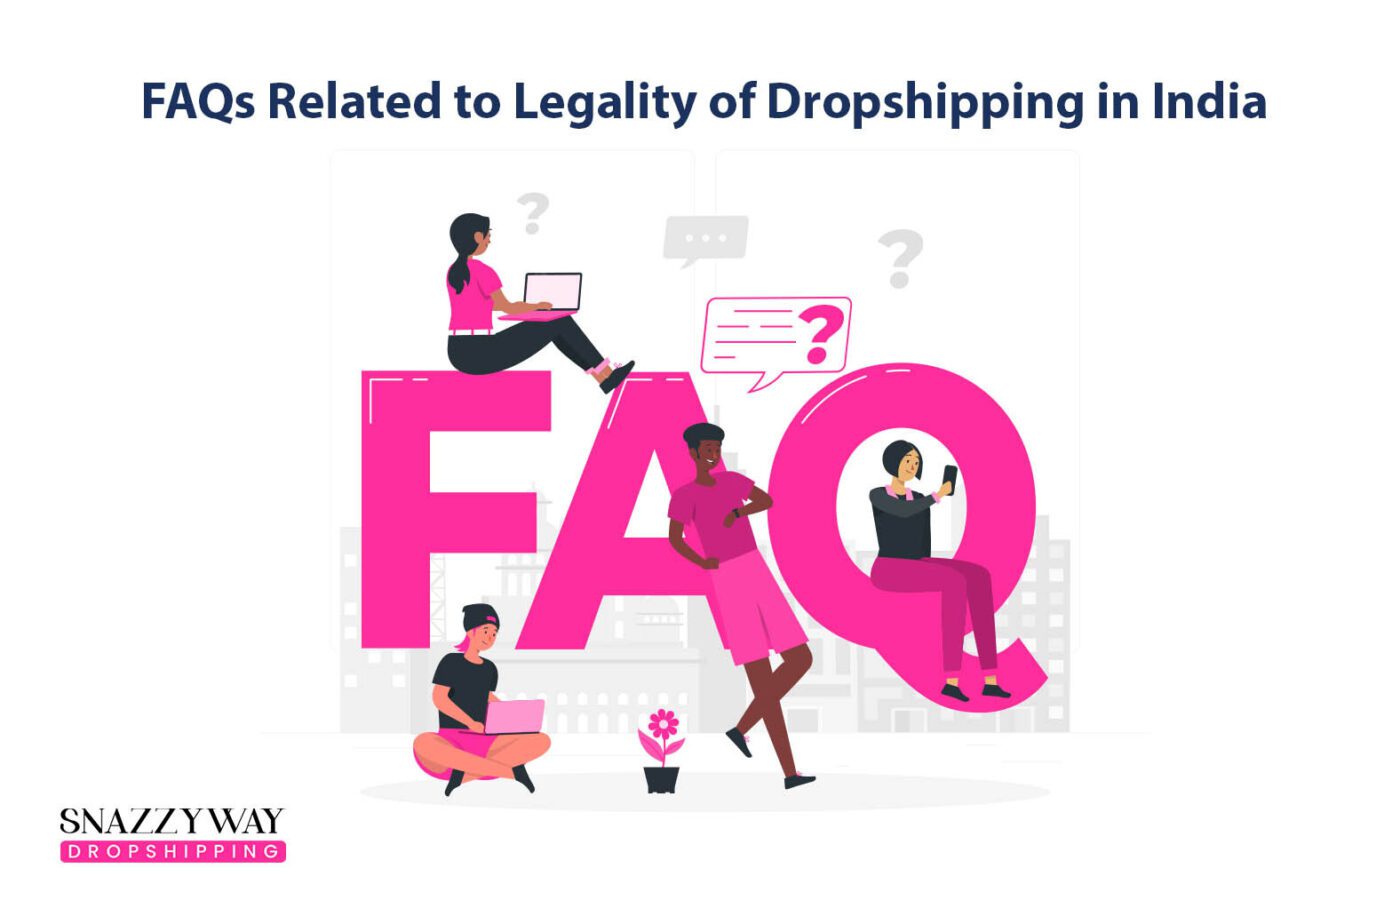 FAQs Related to Legality of Dropshipping in India